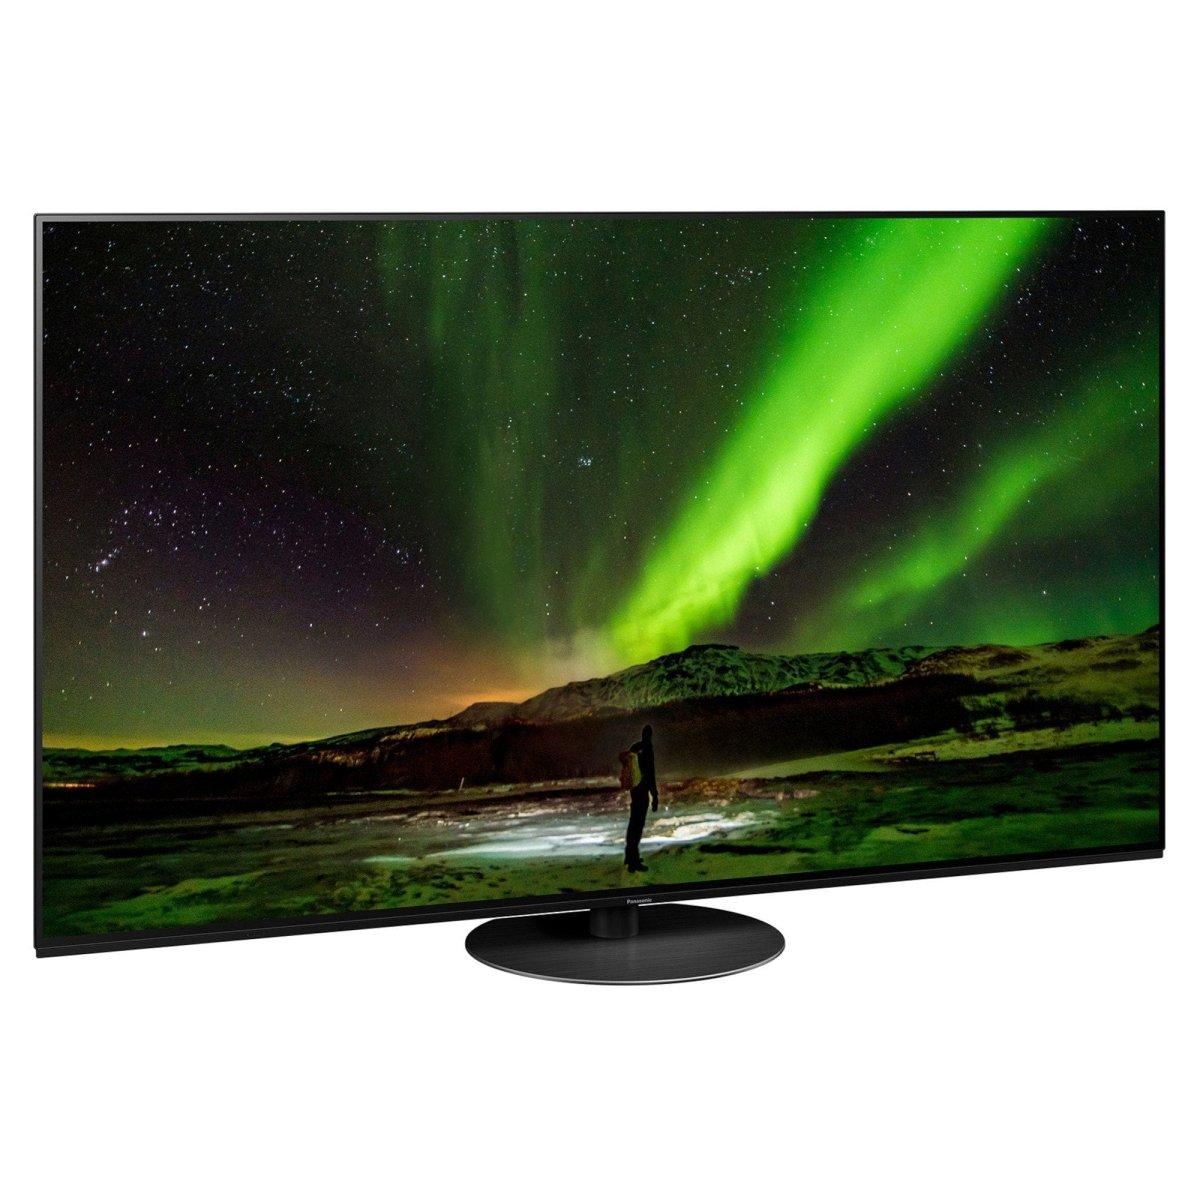 Panasonic TX55JZ1500B OLED HDR 4K Ultra HD Smart TV, 55 inch with Freeview Play & Dolby Atmos, Black | Atlantic Electrics